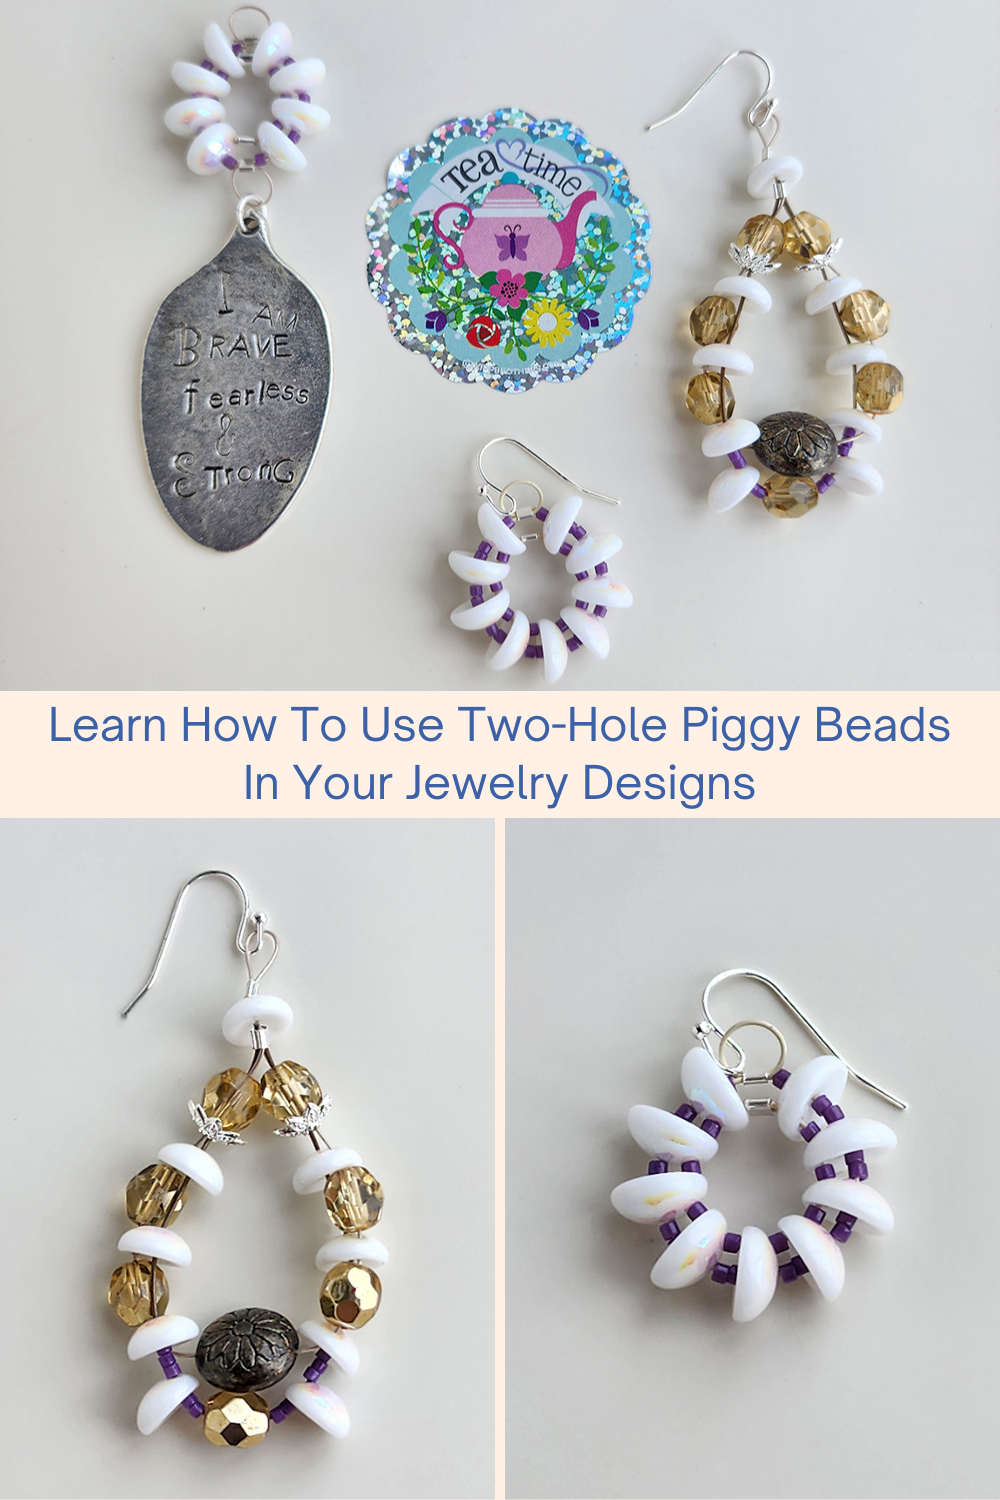 Learn How To Use Two-Hole Piggy Beads In Your Jewelry Designs Collage